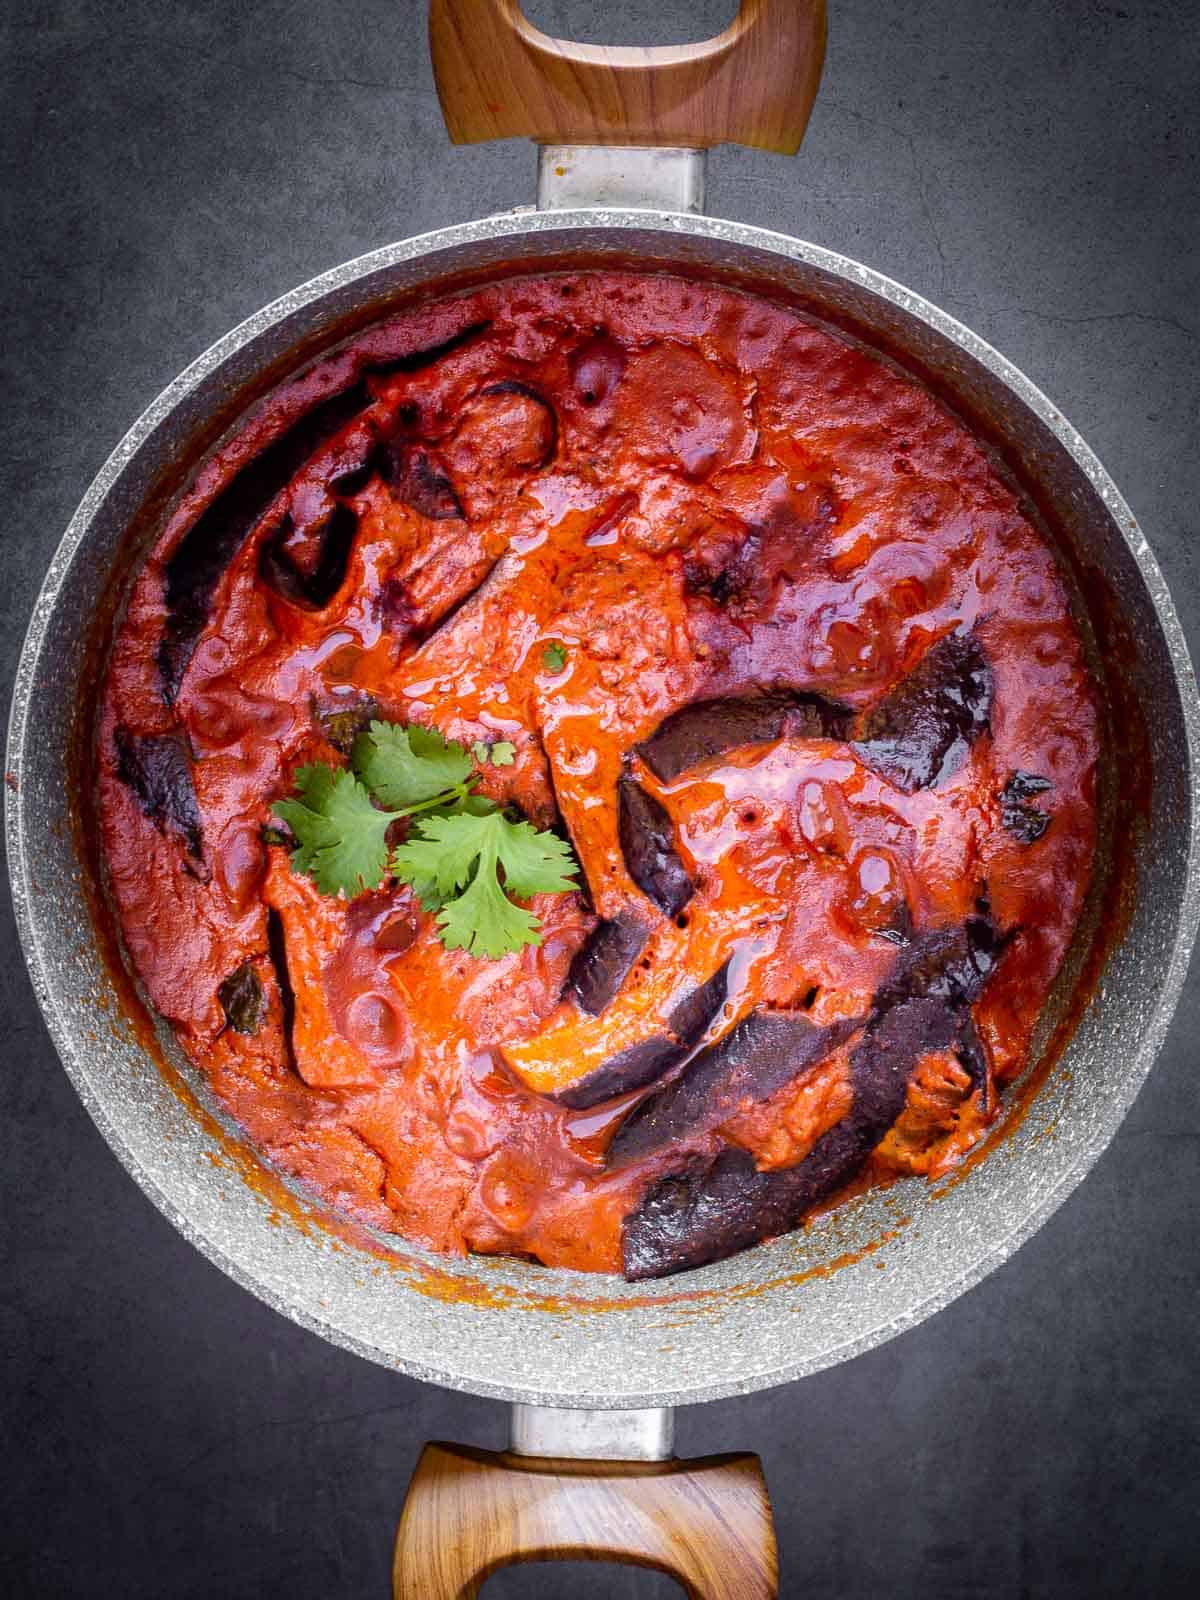 cooking Eggplant Curry with tomato sauce in a large pot.